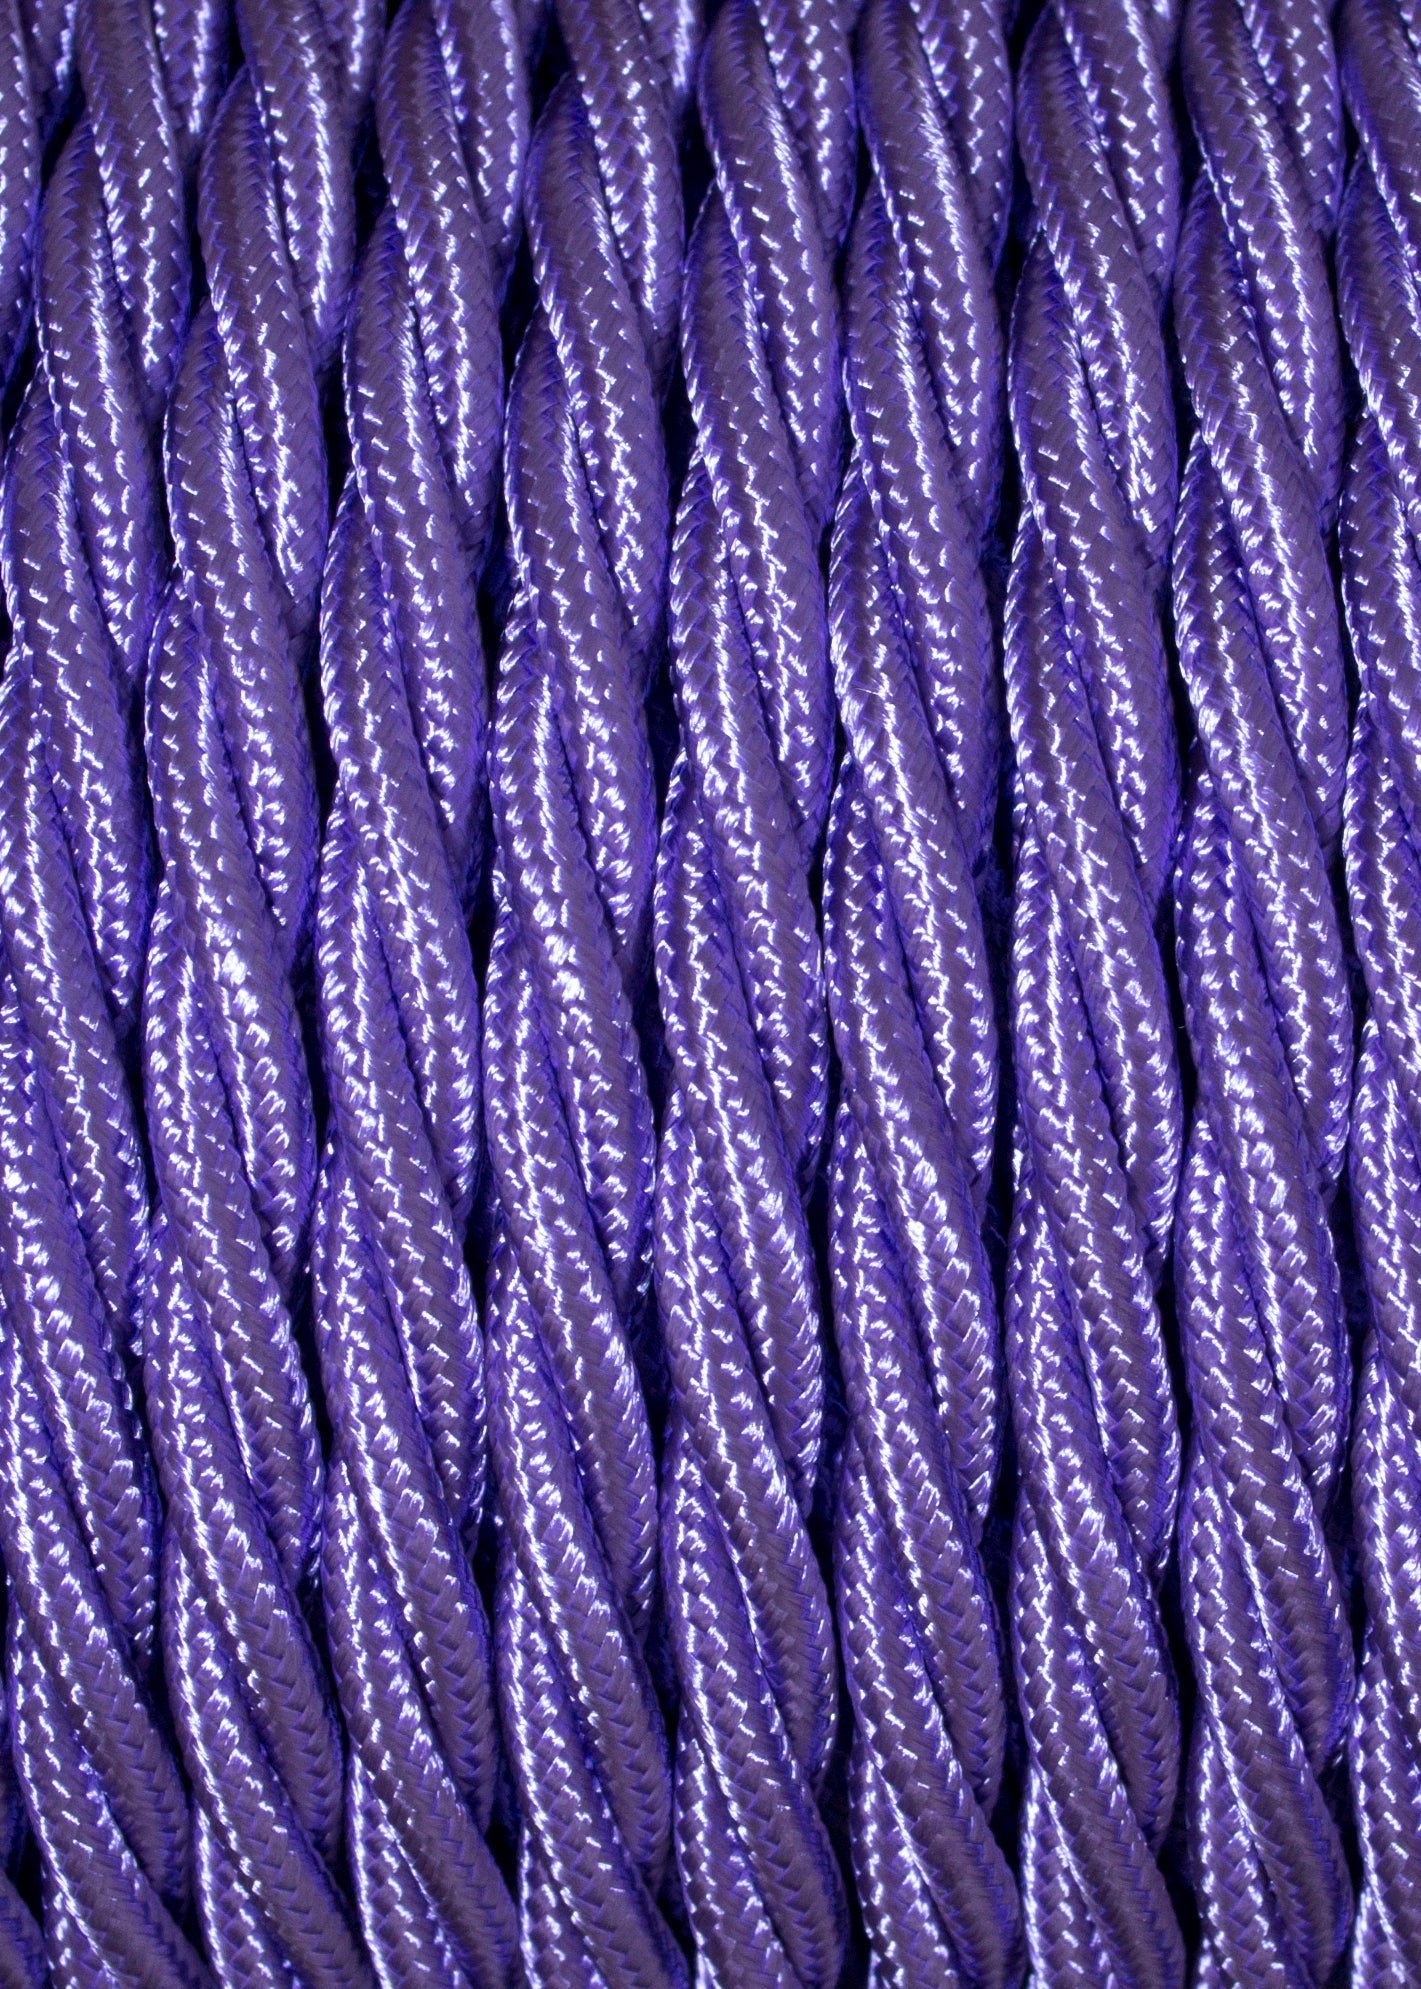 Violet + Black - Lola's Leads Fabric Extension Cable